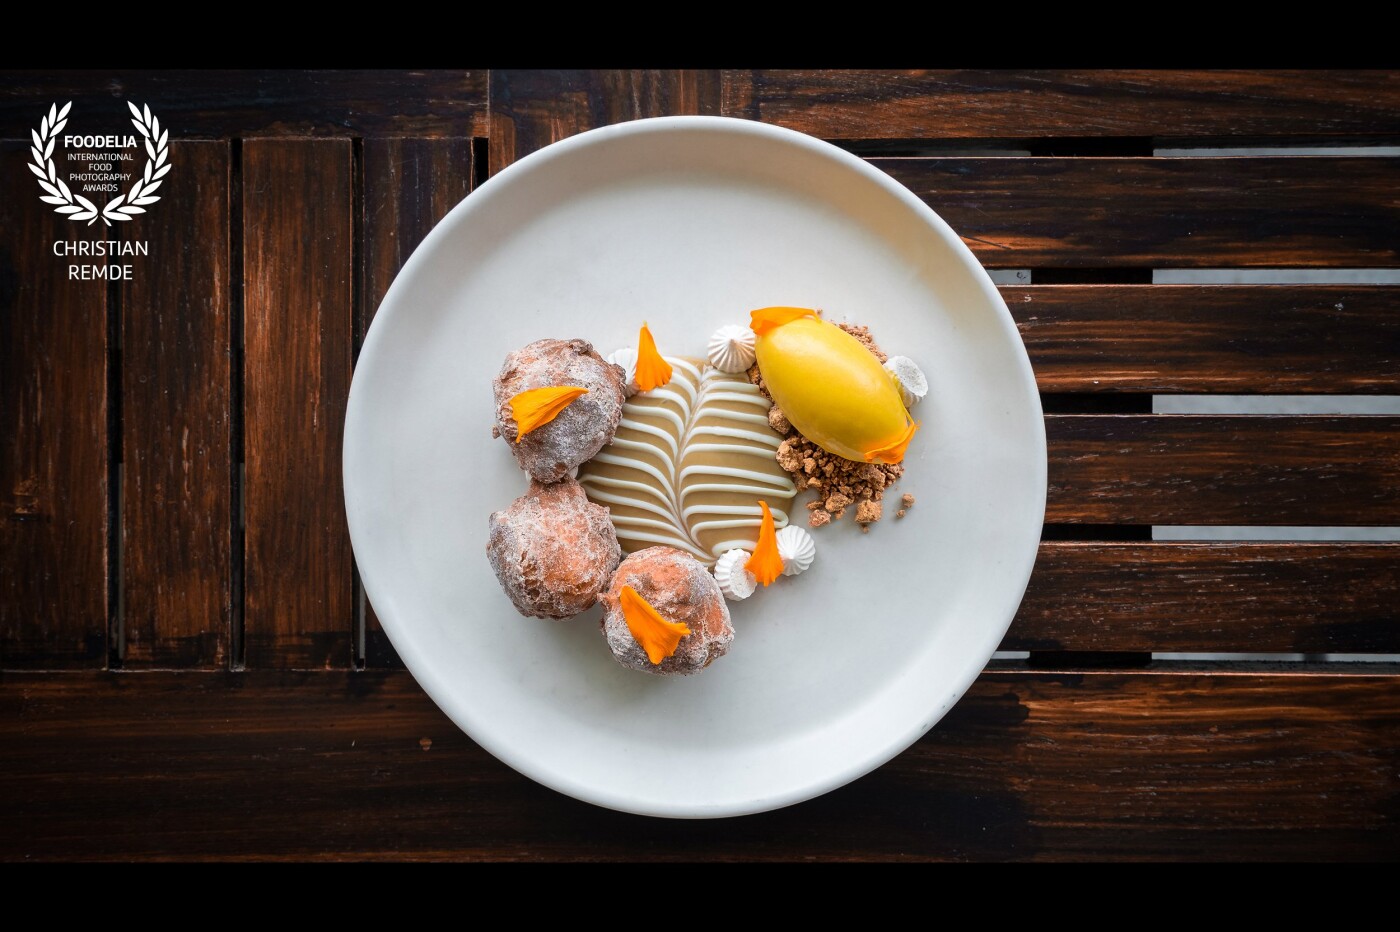 Donuts with espresso custard and butternut squash ice cream.  Taken at Barley Swine in Austin Texas, this dish was created by pastry chef Sarah Preito to celebrate how holidays spent baking with her grandmother helped to shape her love of food.